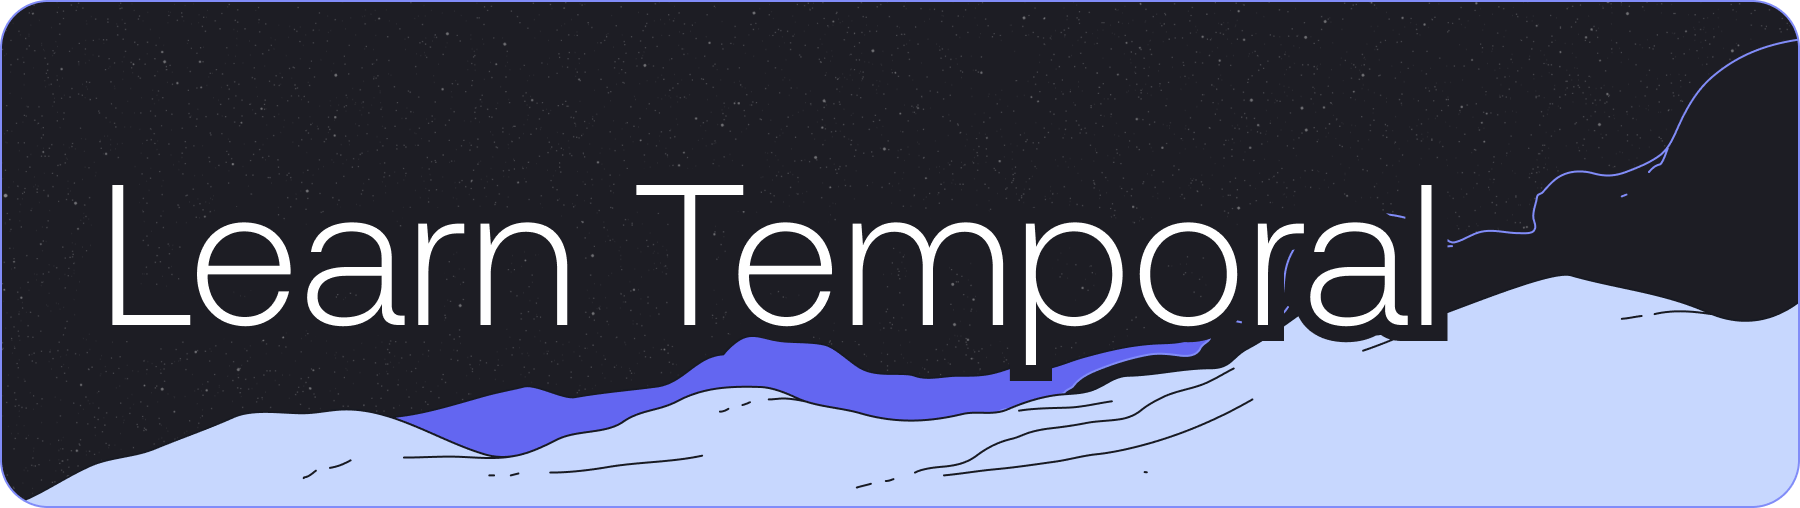 Learn Temporal